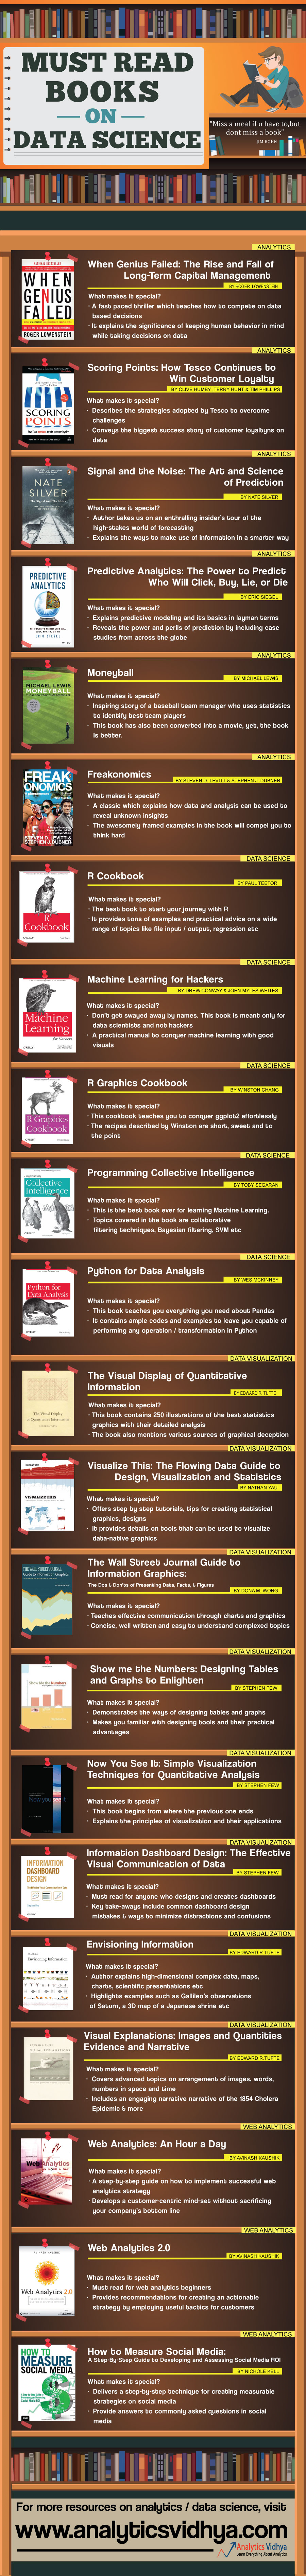 must read books in analytics, data science, business analytics for beginners